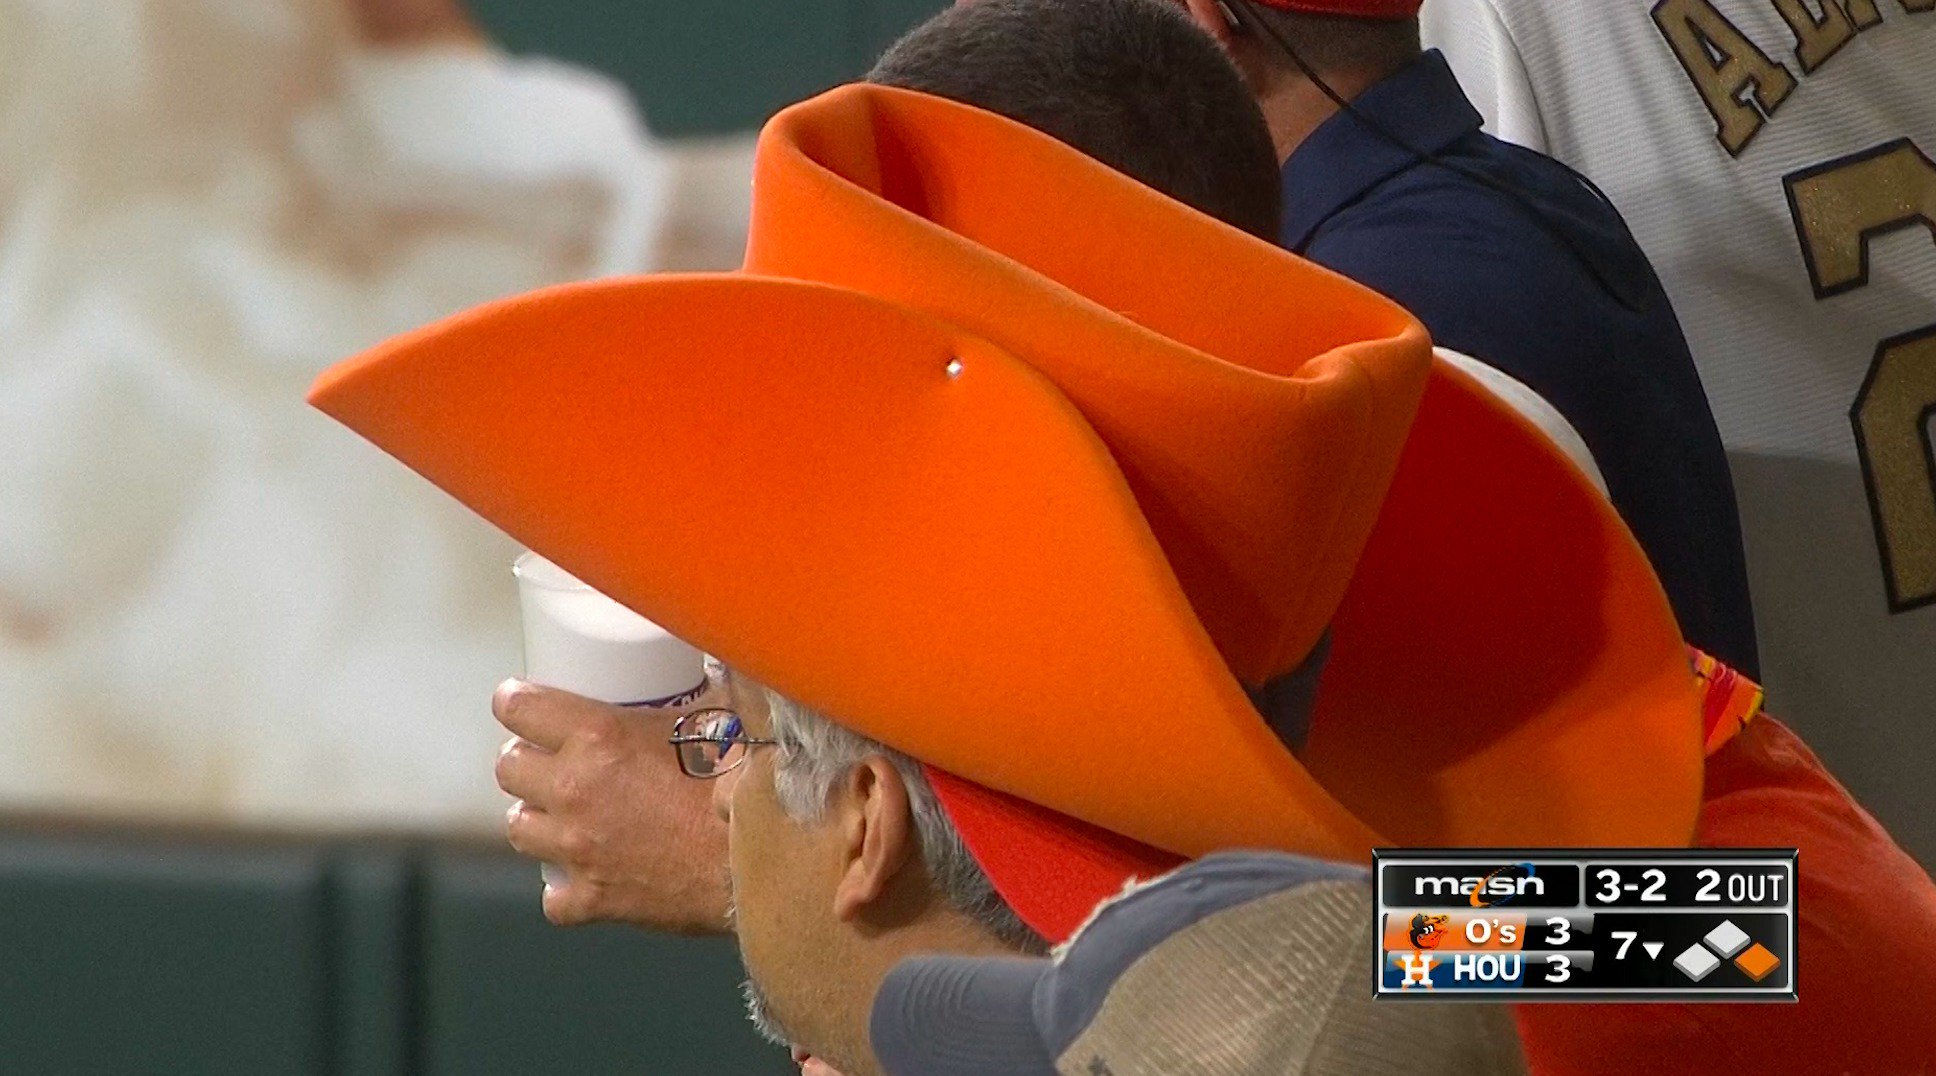 Orioles on MASN on X: 🎶 Cowboy hat from Gucci 🎶   / X